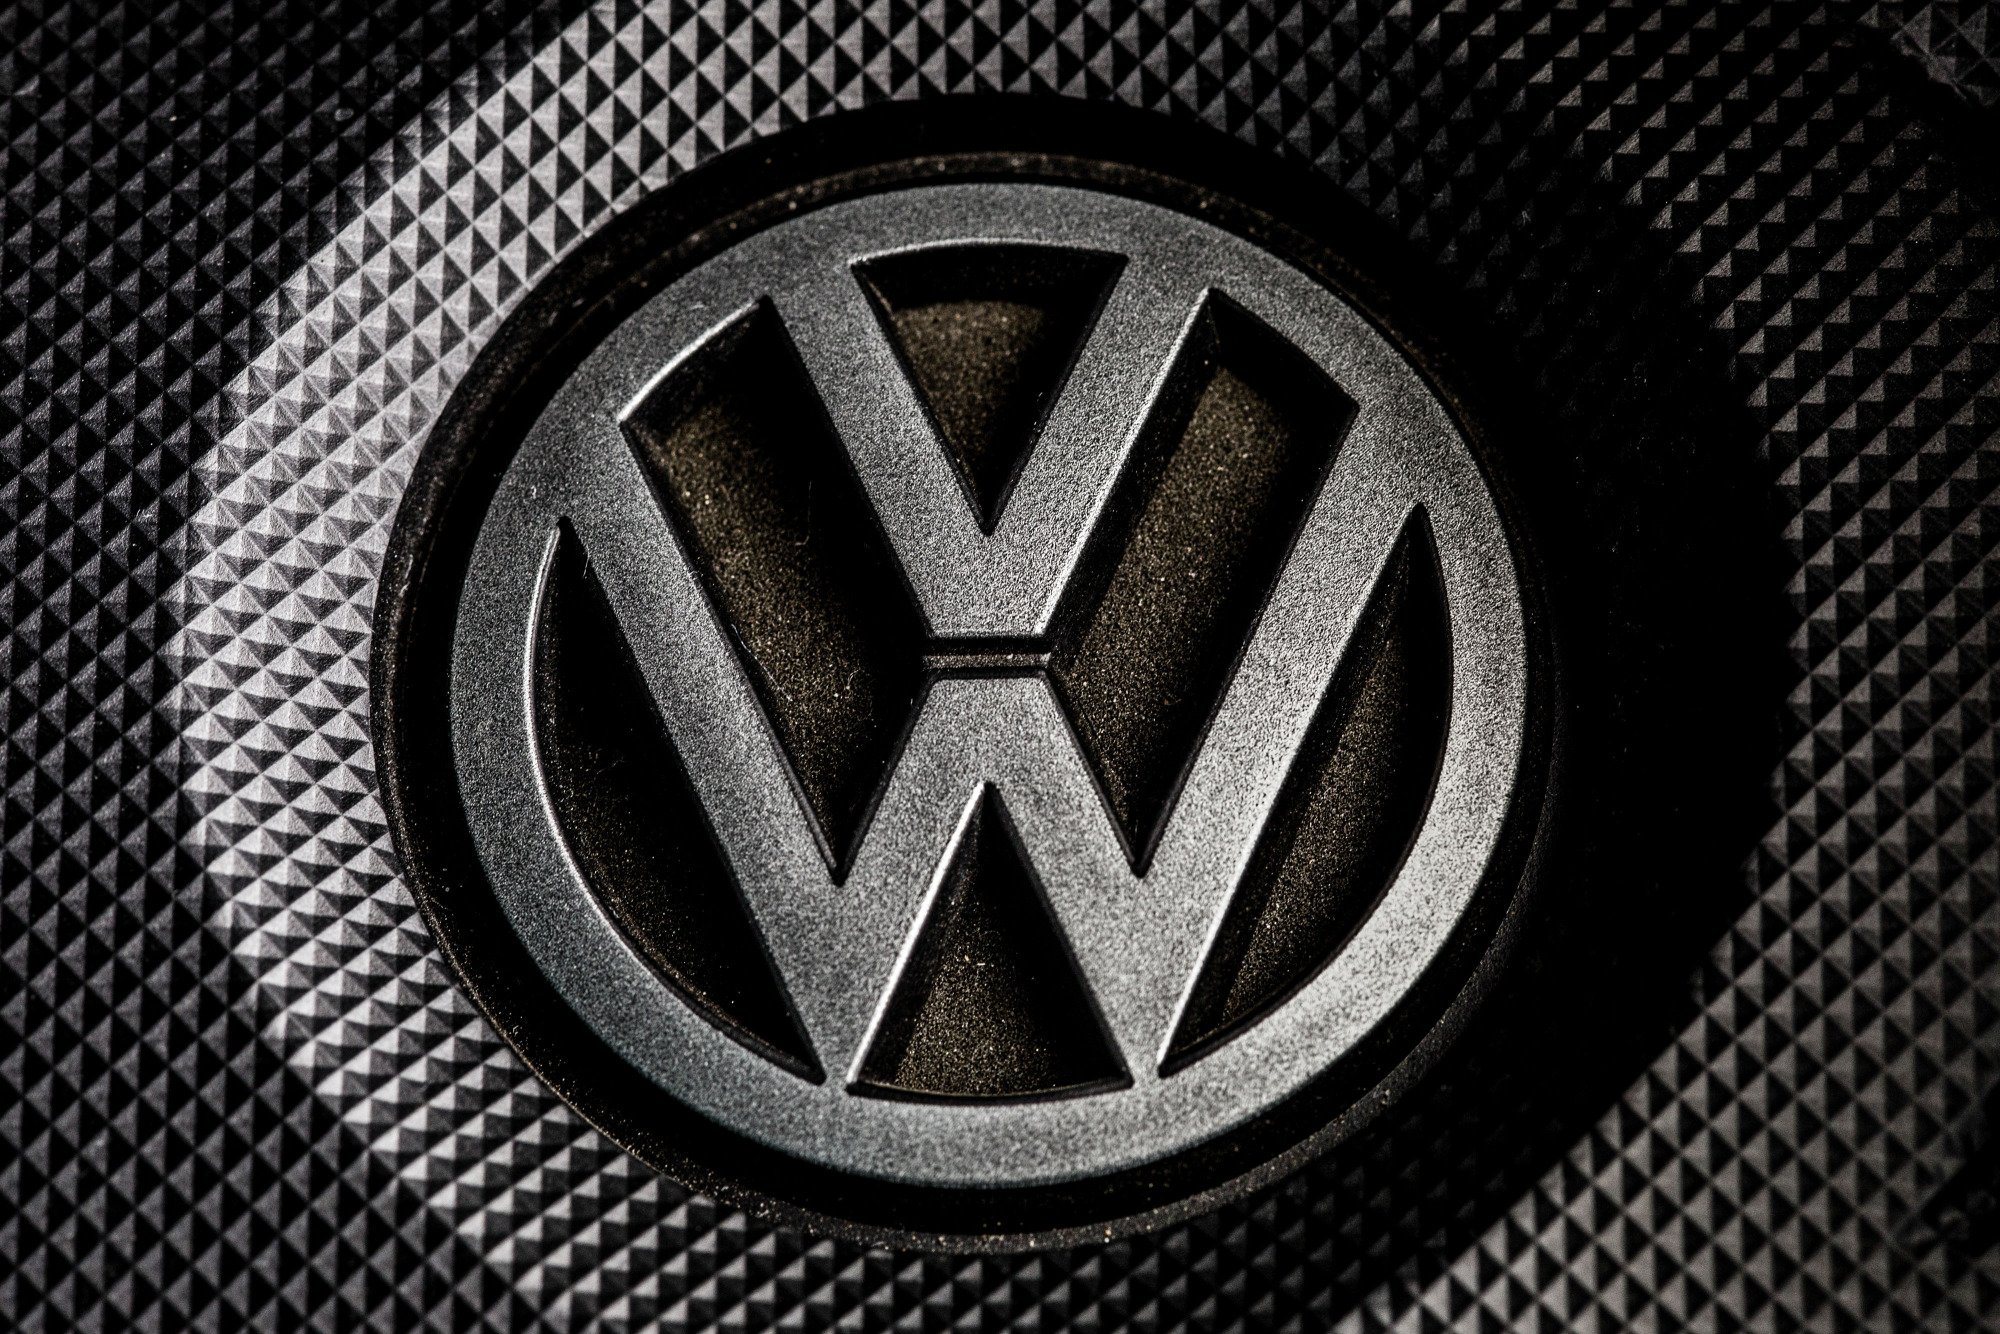 Volkswagen Charged With Diesel Emissions Deceit as France Chases Carmakers  - Bloomberg